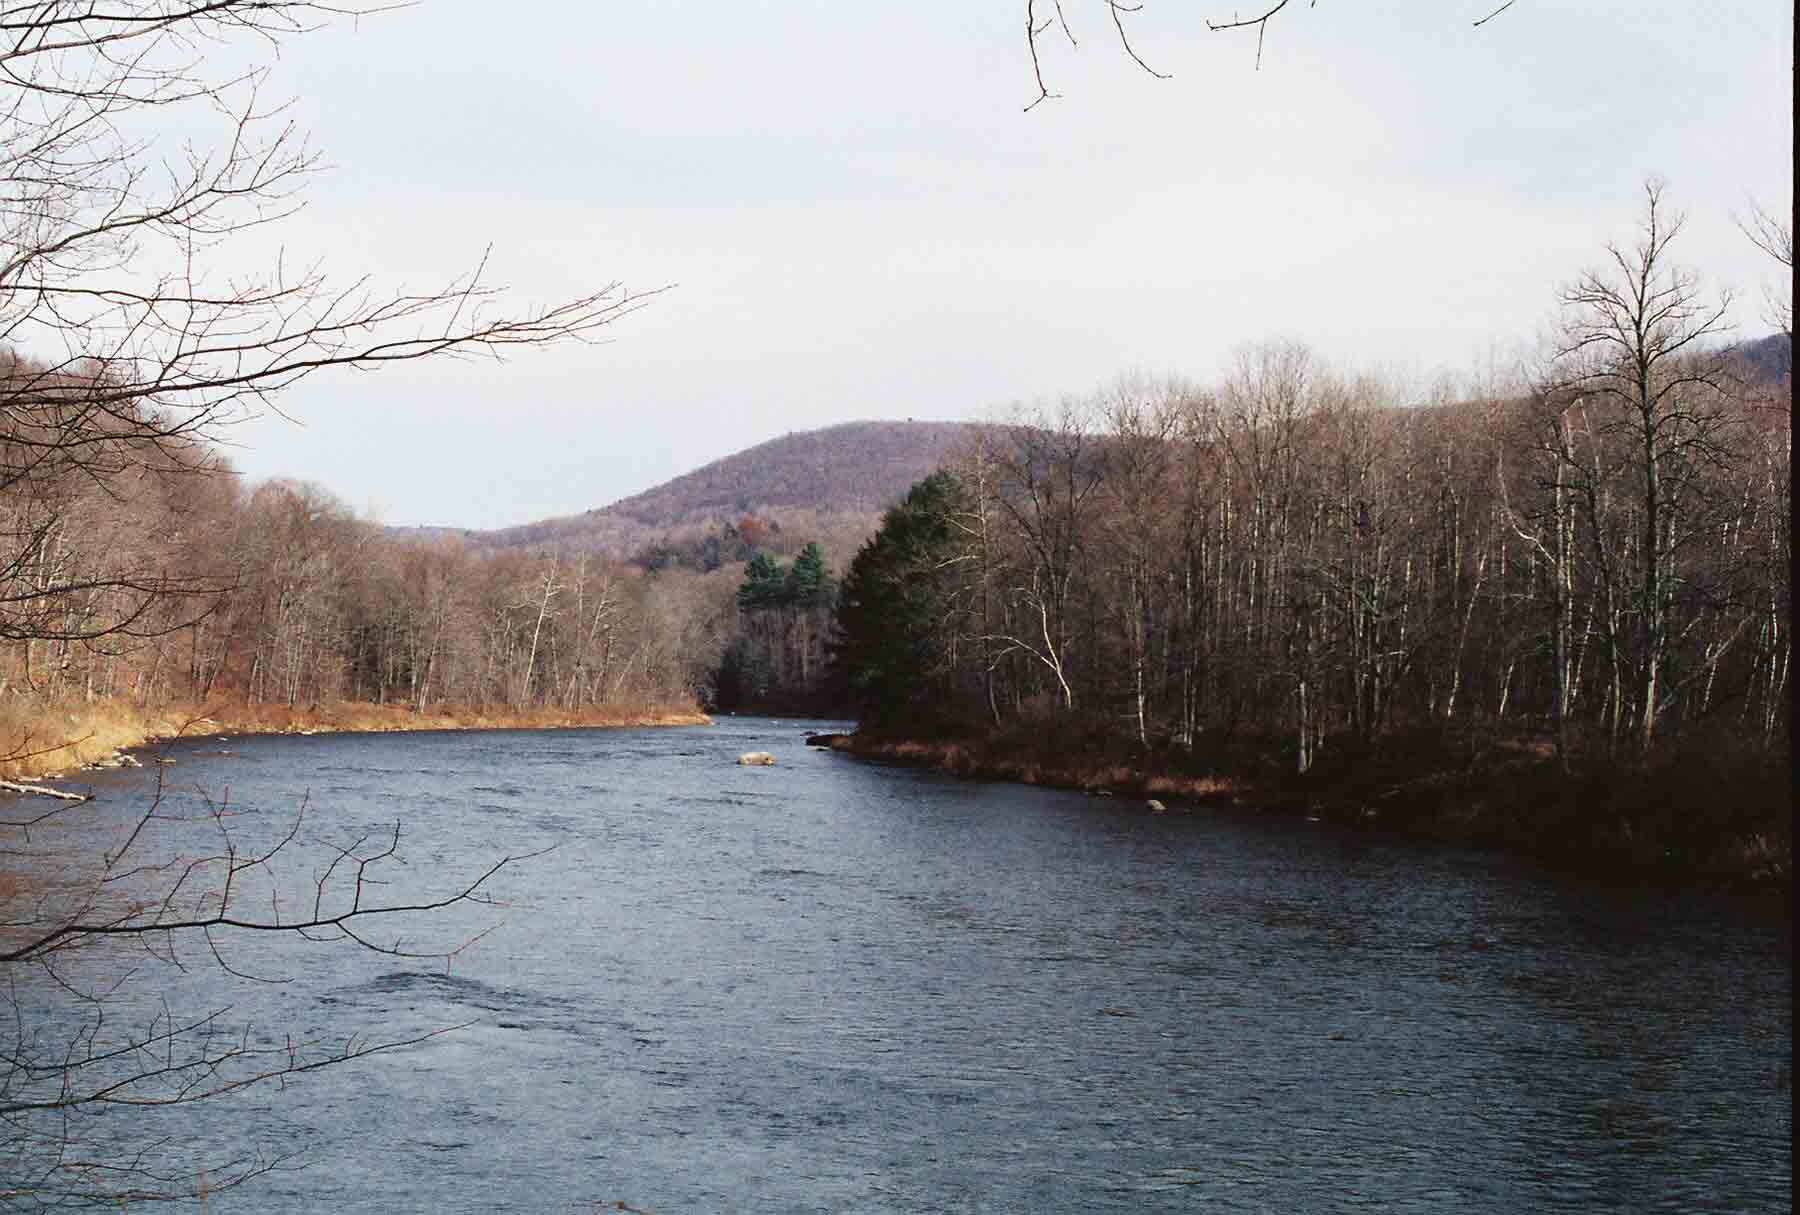 Another view of the Housatonic River from the "River Walk" section of the AT.  Courtesy dlcul@conncoll.edu